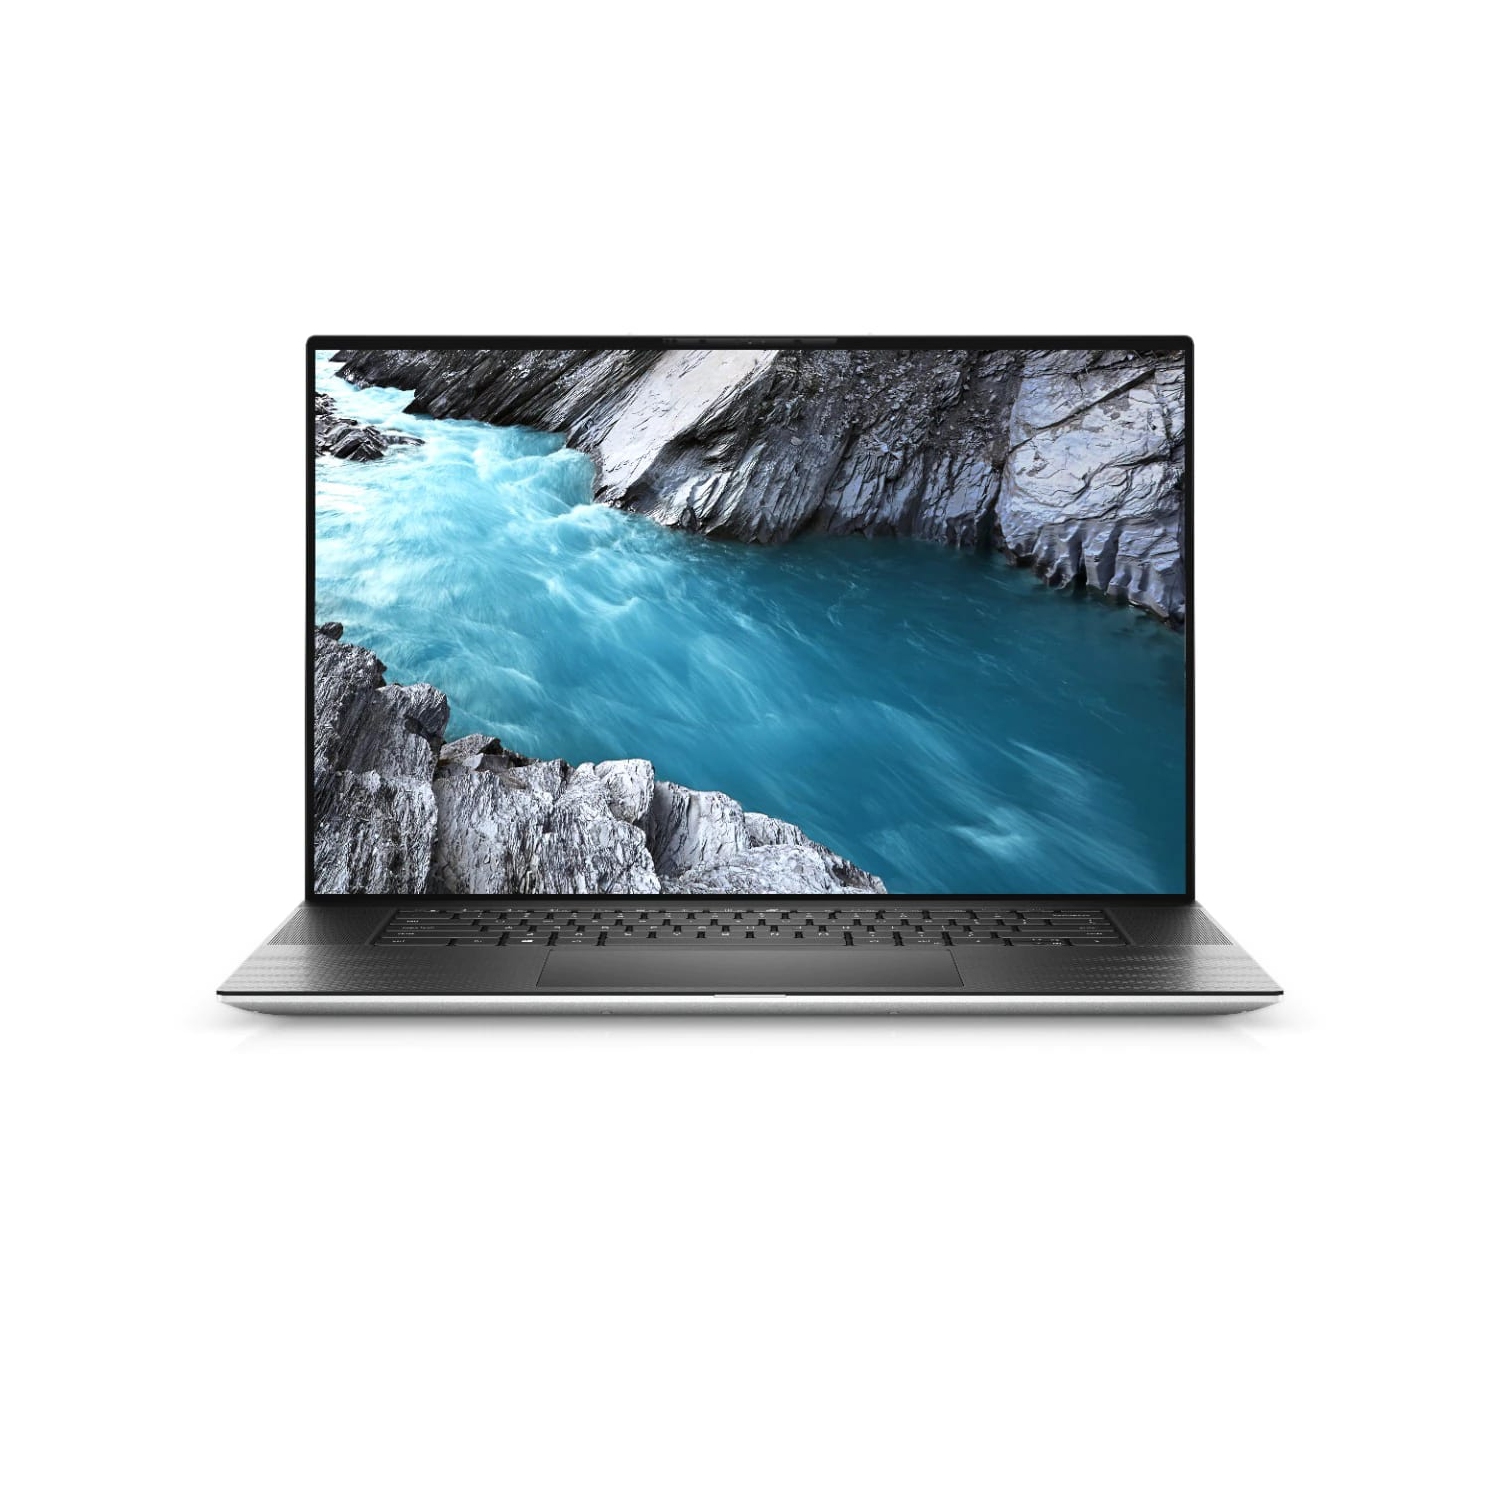 Refurbished (Excellent) - Dell XPS 17 9700 Laptop (2020) | 17" 4K Touch | Core i7 - 256GB SSD - 16GB RAM - 1650 Ti | 6 Cores @ 5 GHz - 10th Gen CPU Certified Refurbished